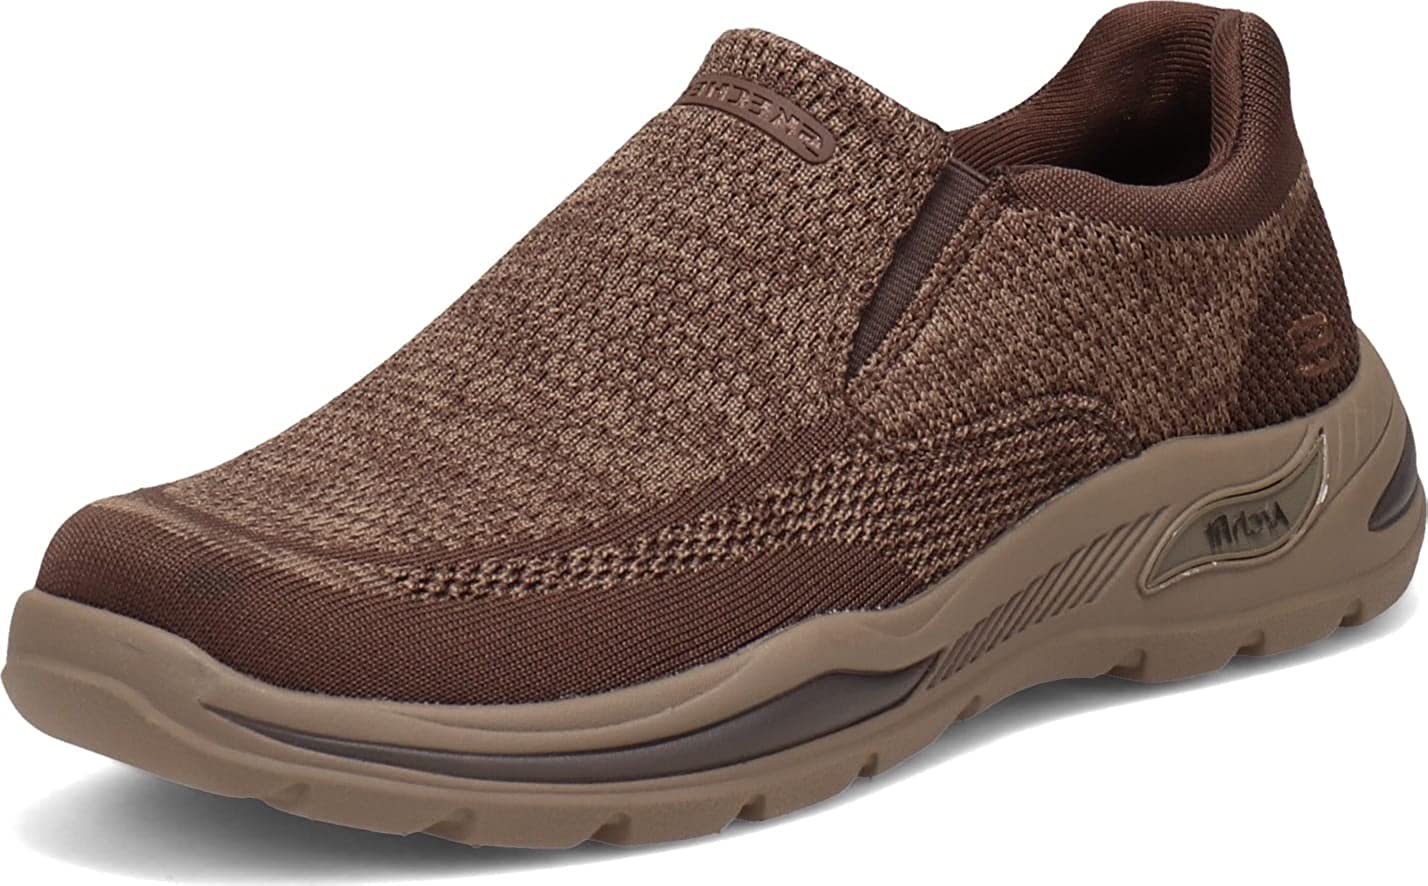 Skechers - Mens Arch Fit Motley - Vaseo Slip On Shoes